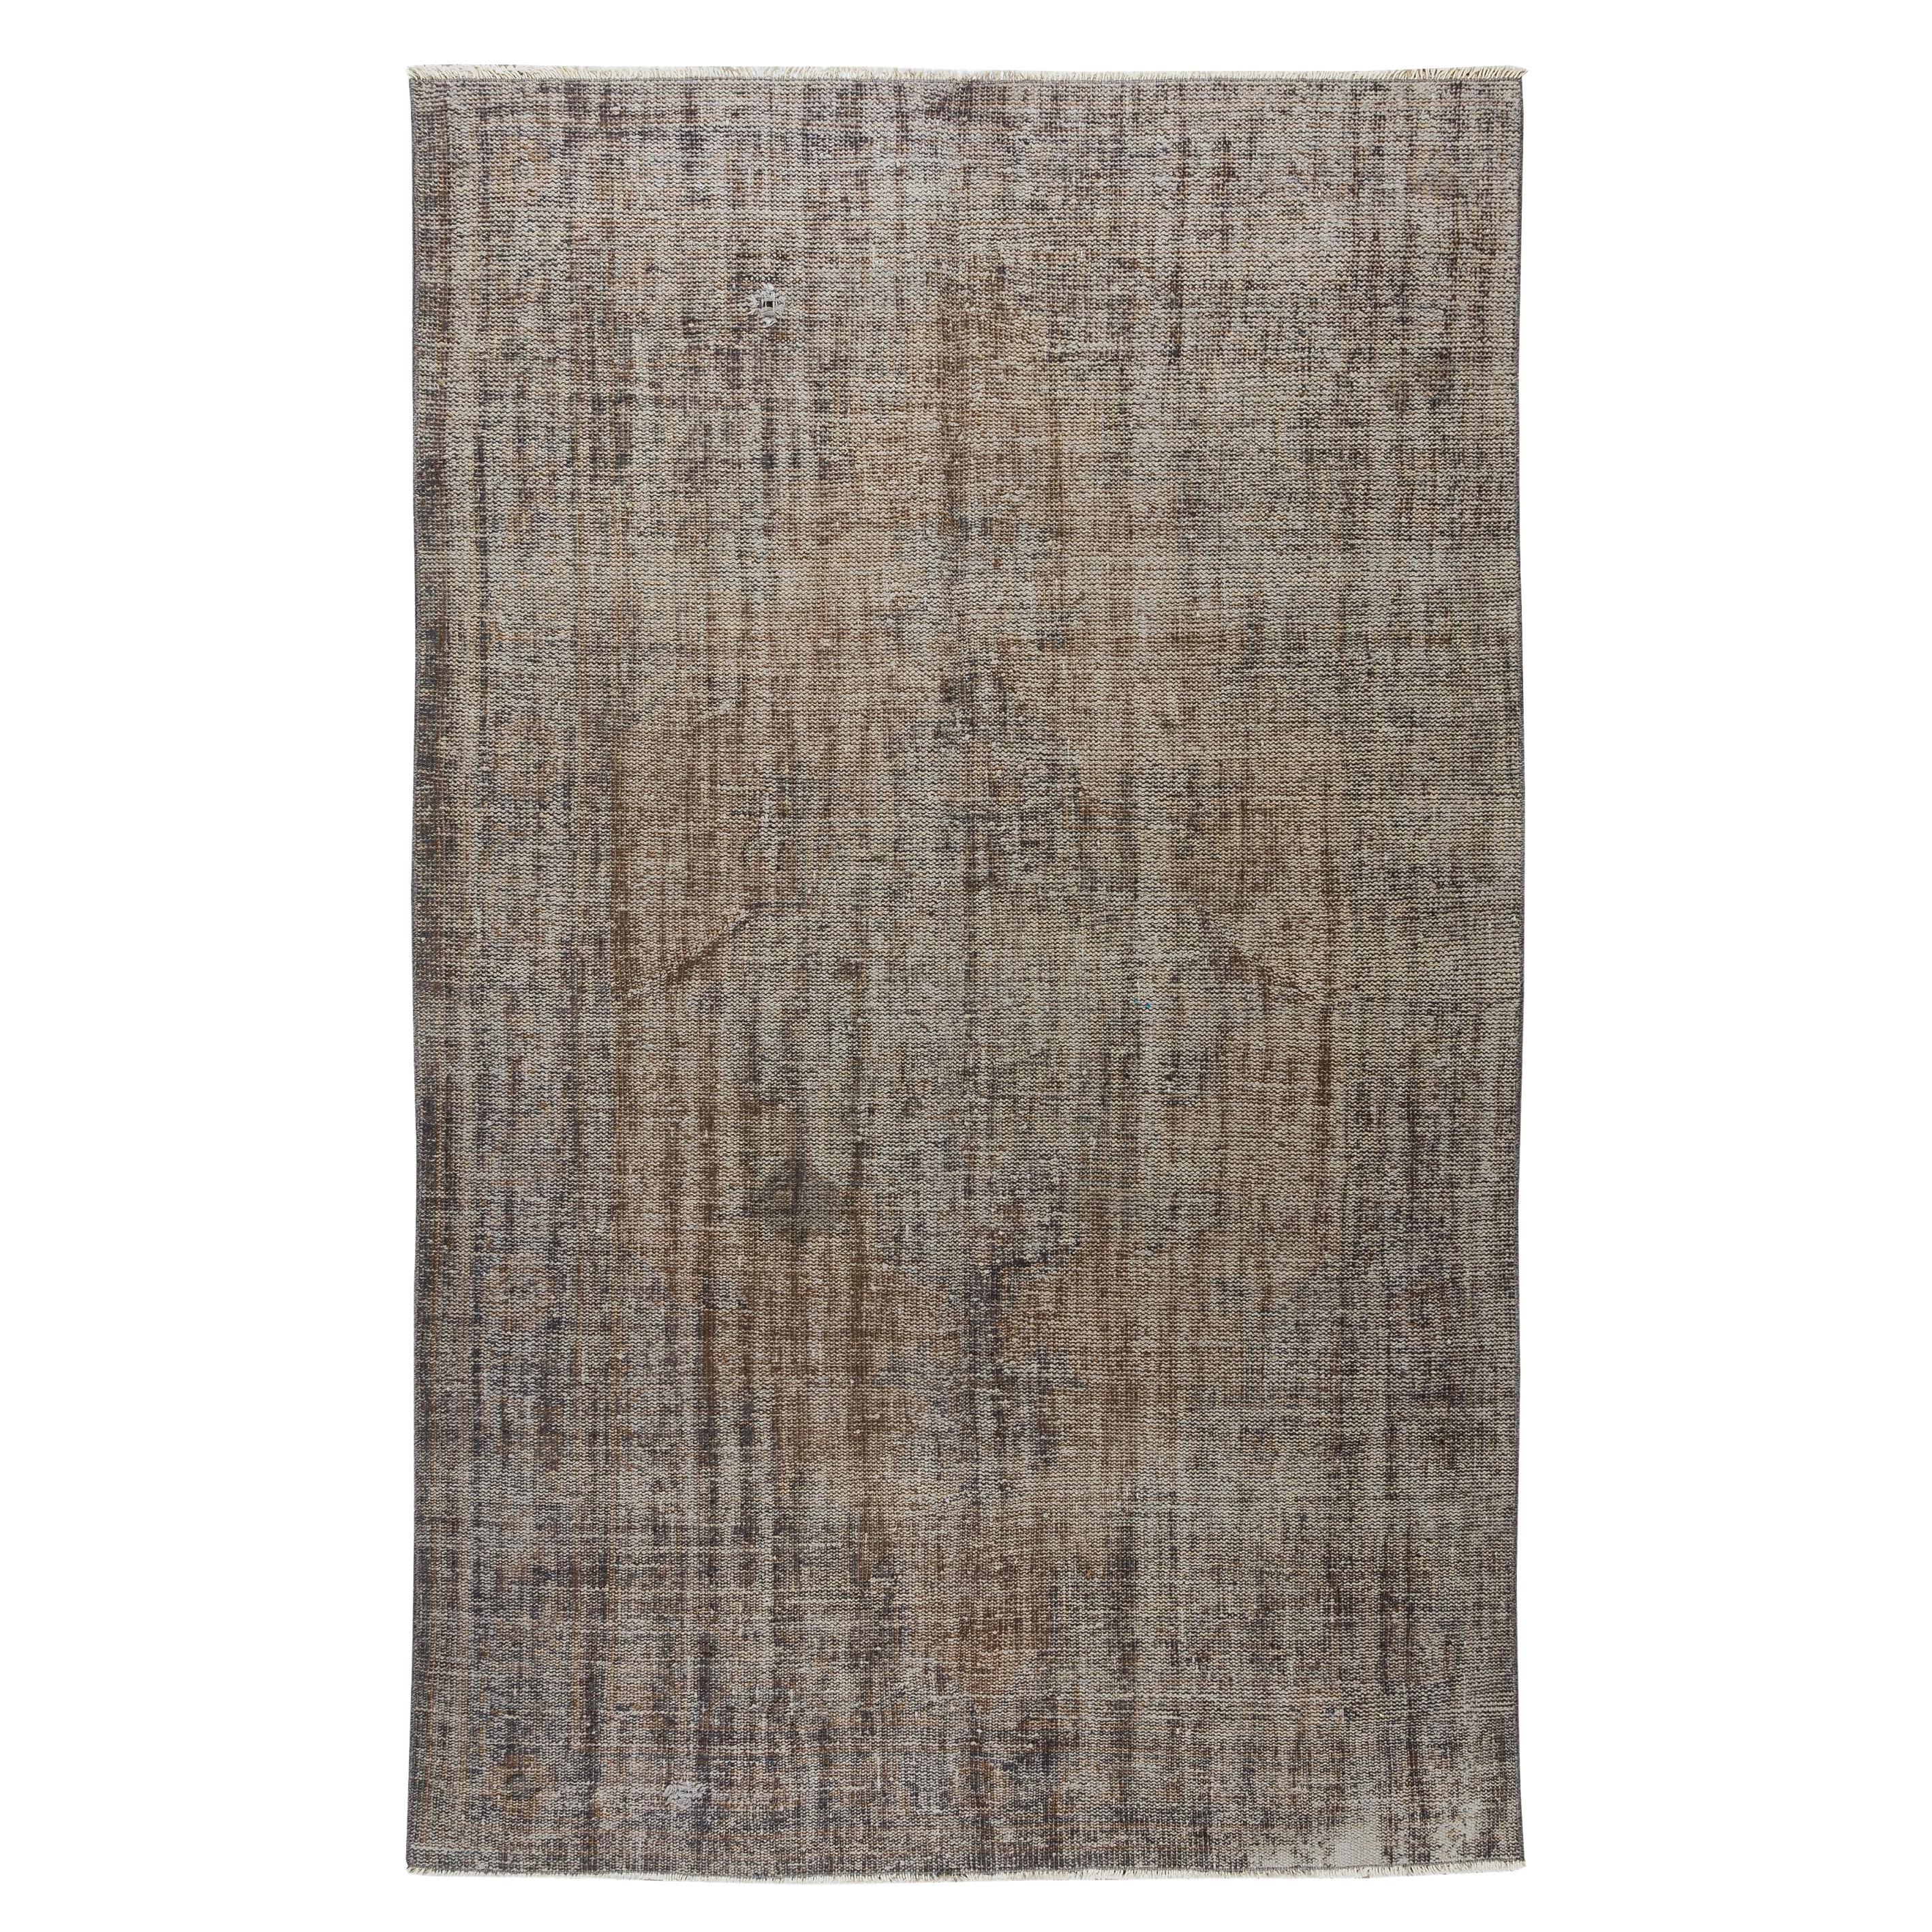 Traditional Handmade Shabby Chic Rug in Gray, Vintage Anatolian Carpet For Sale